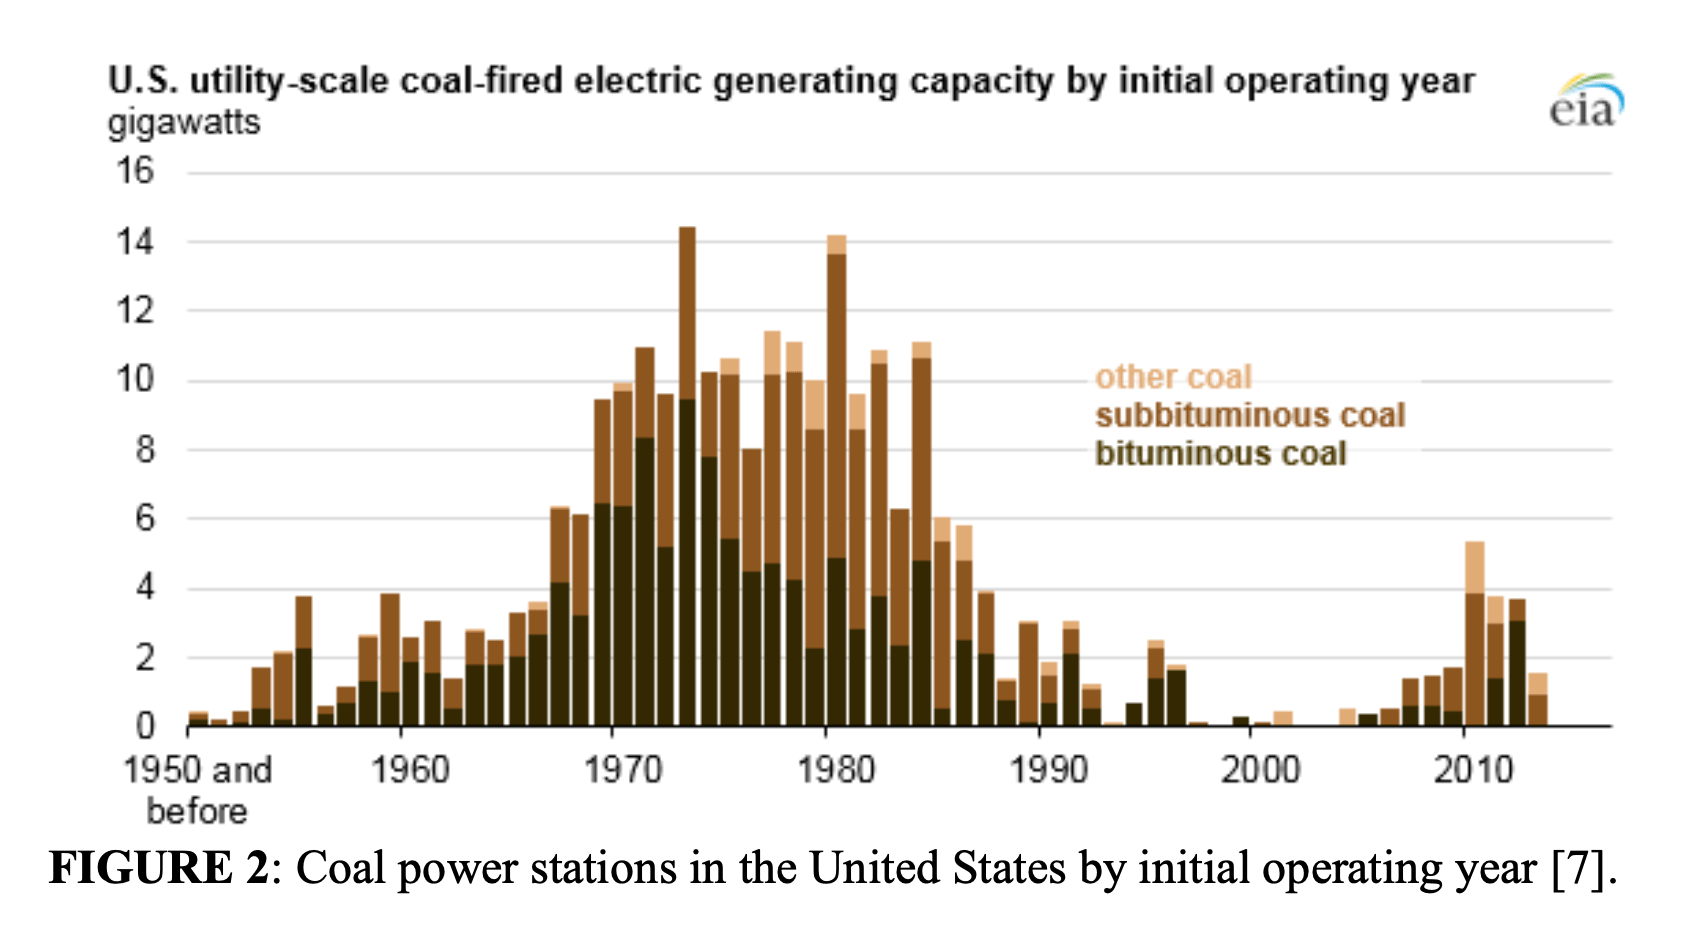 The business case for storing energy thermally in former coal plants